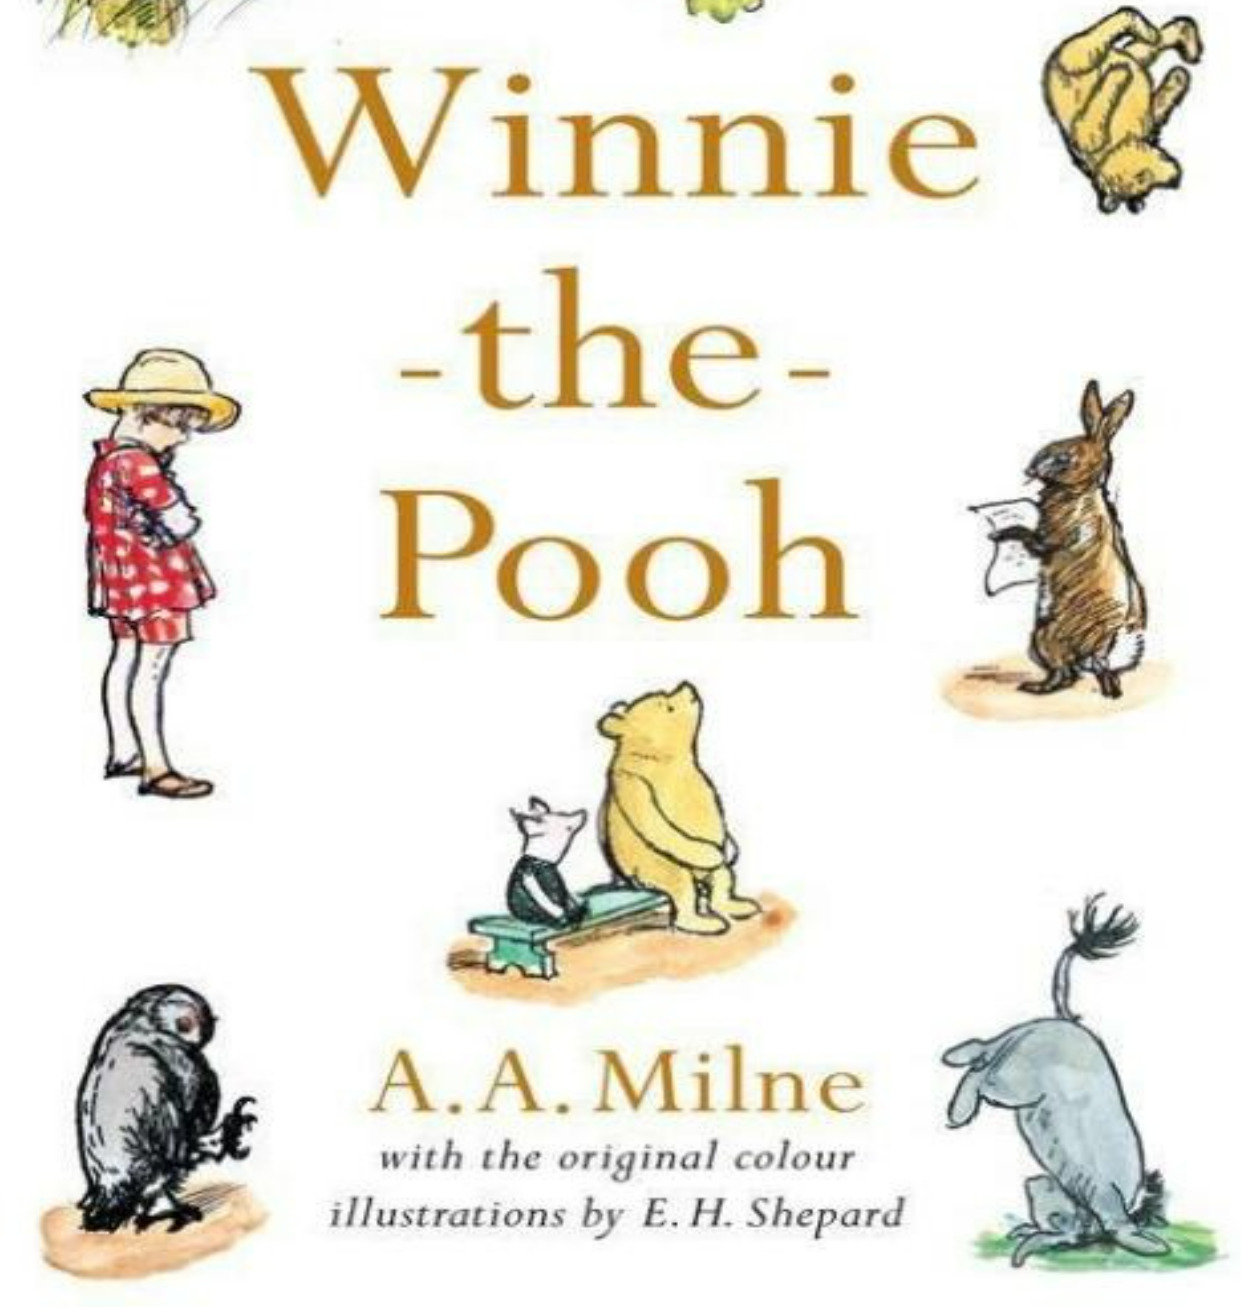 「Winnie the Pooh」の読み方は？